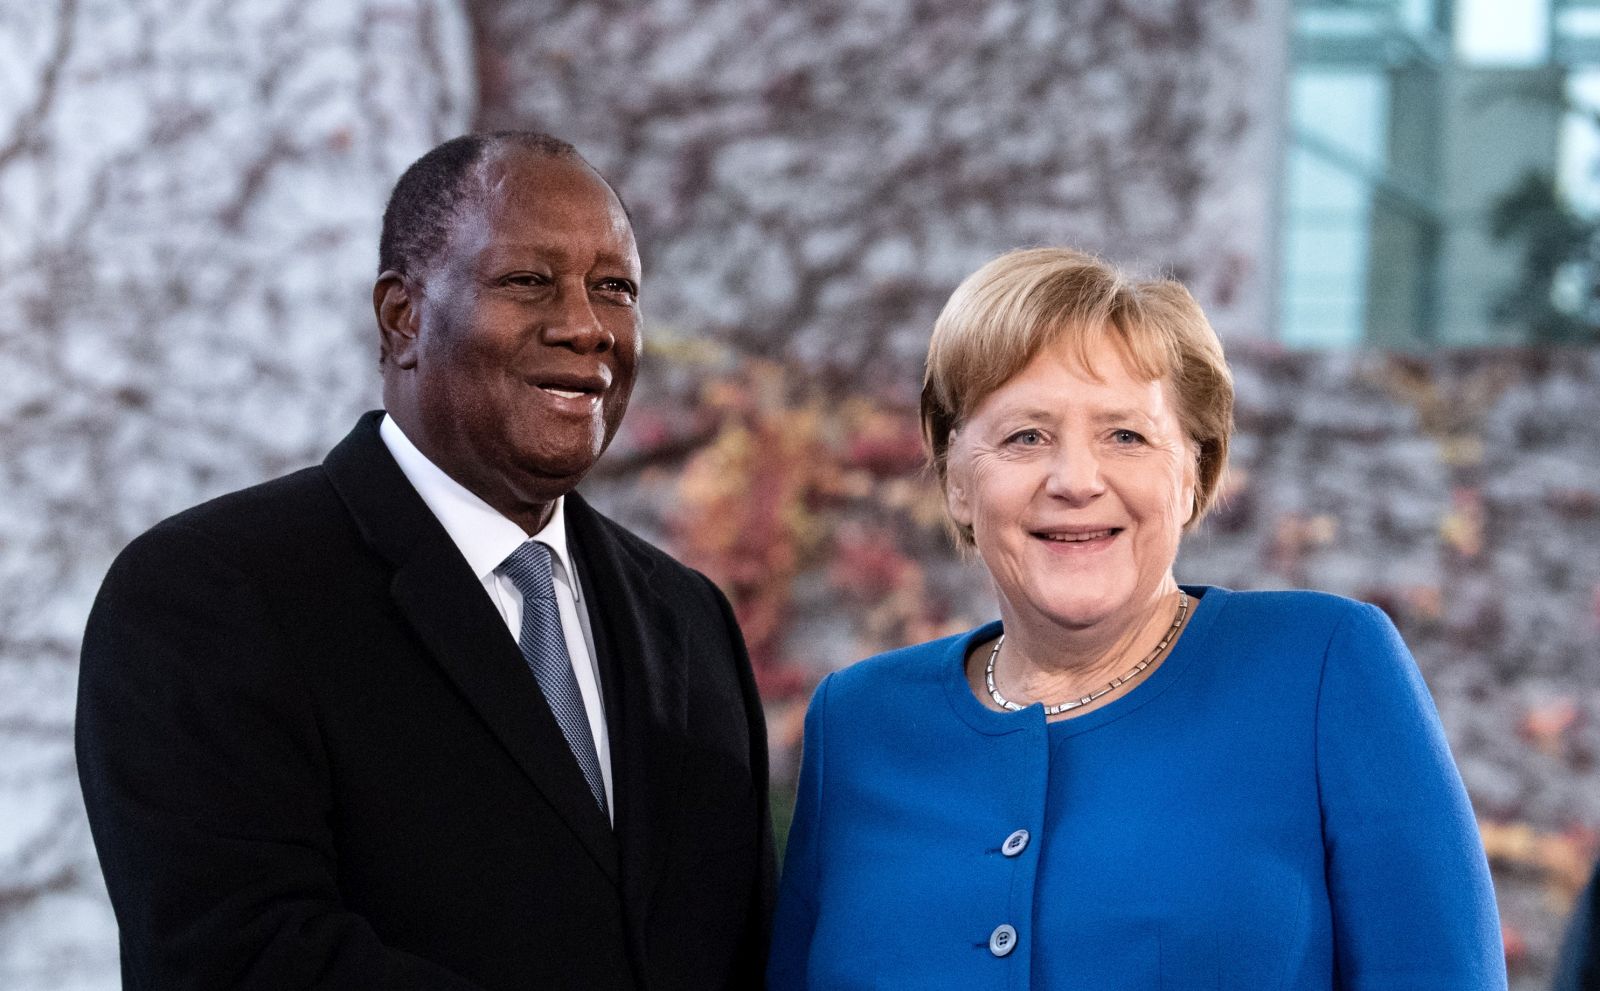 German Chancellor Angela Merkel welcoming President Alassane Ouattara to the Compact with Africa conference in Berlin in 2019.